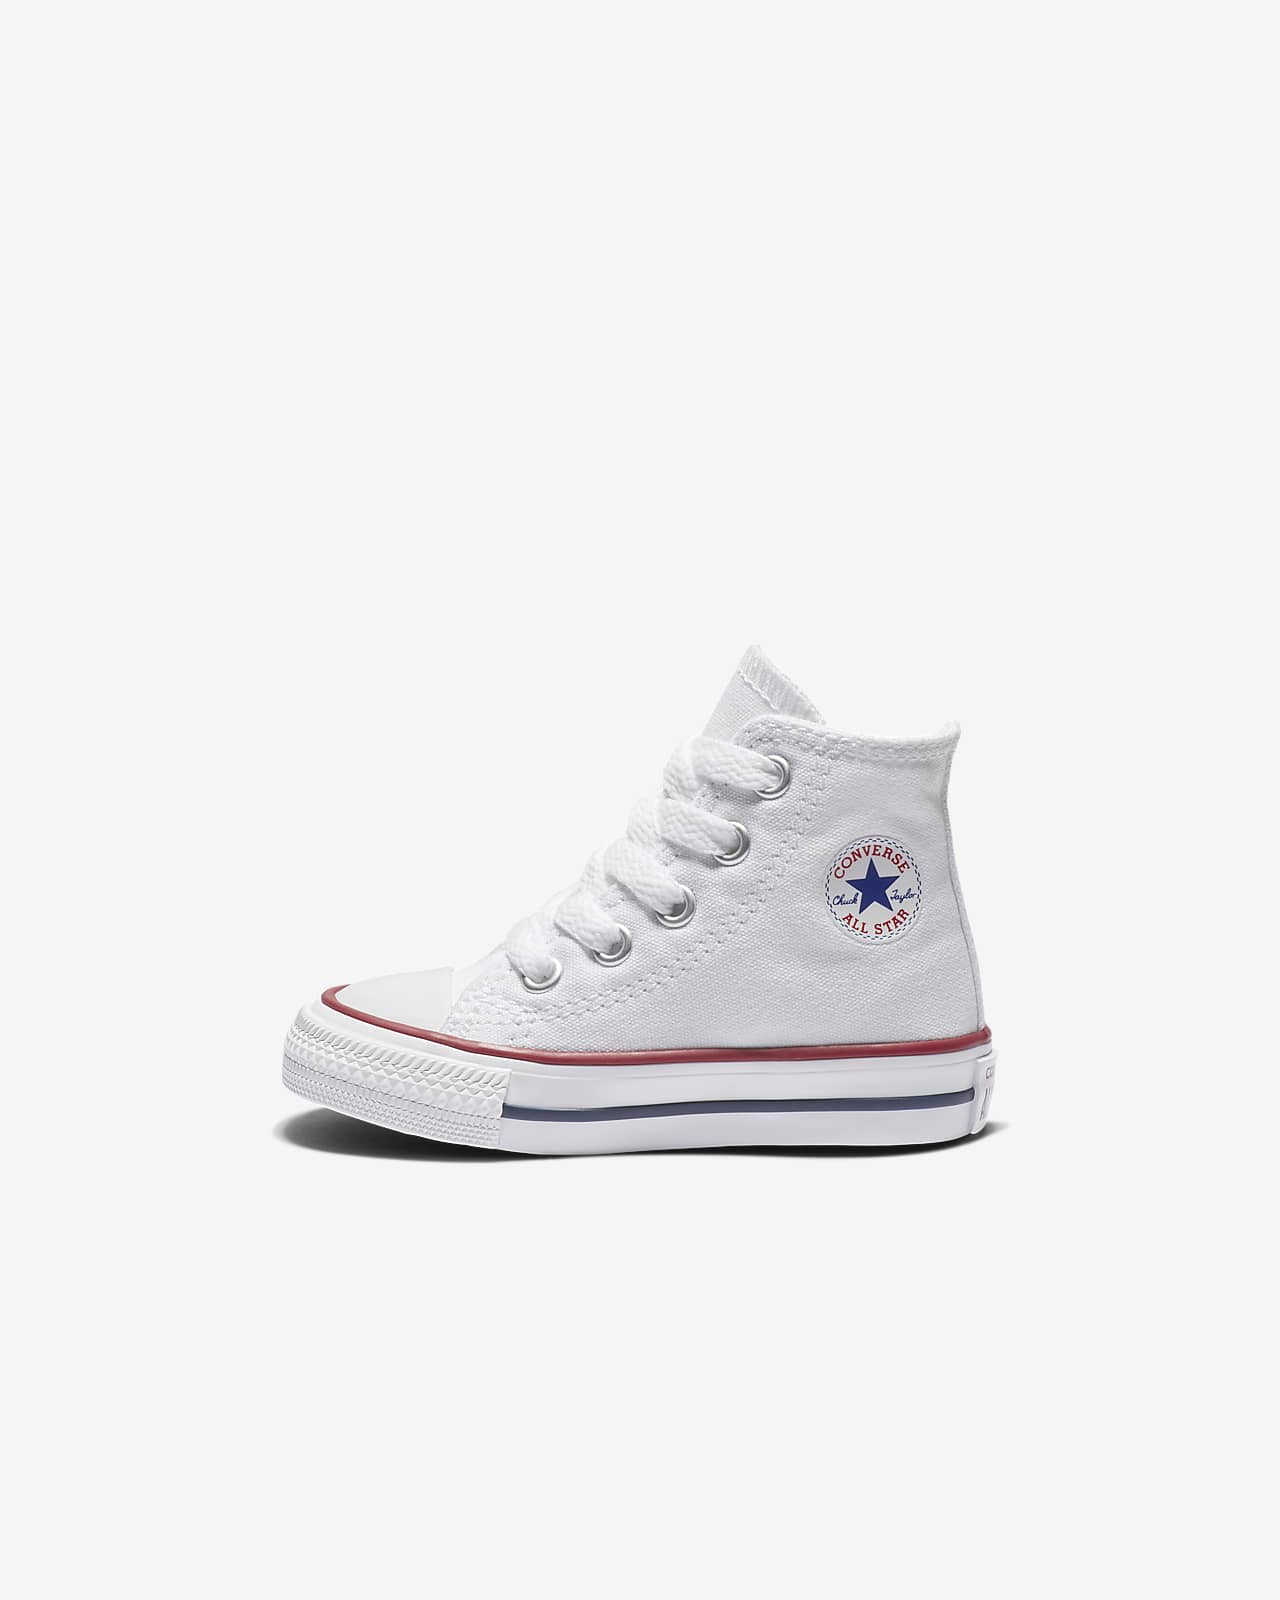 Converse Chuck Taylor All Star High Top (2c-10c) Infant/Toddler Shoe